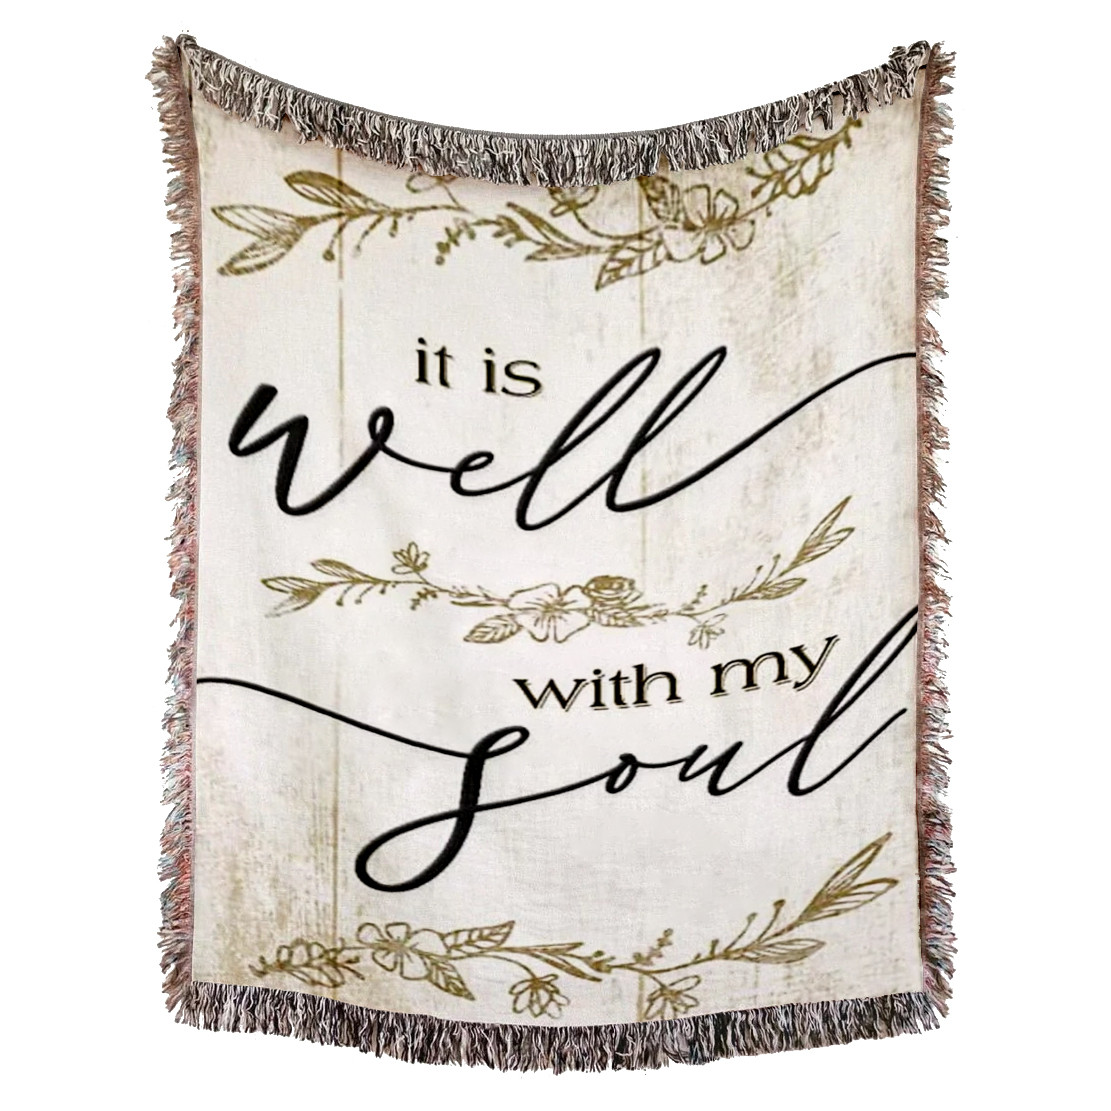 Christian Hymn Woven Blanket - It Is Well With My Soul Woven Throw Blanket - Christian Hymn Tapestry Decor For Christian Blanket